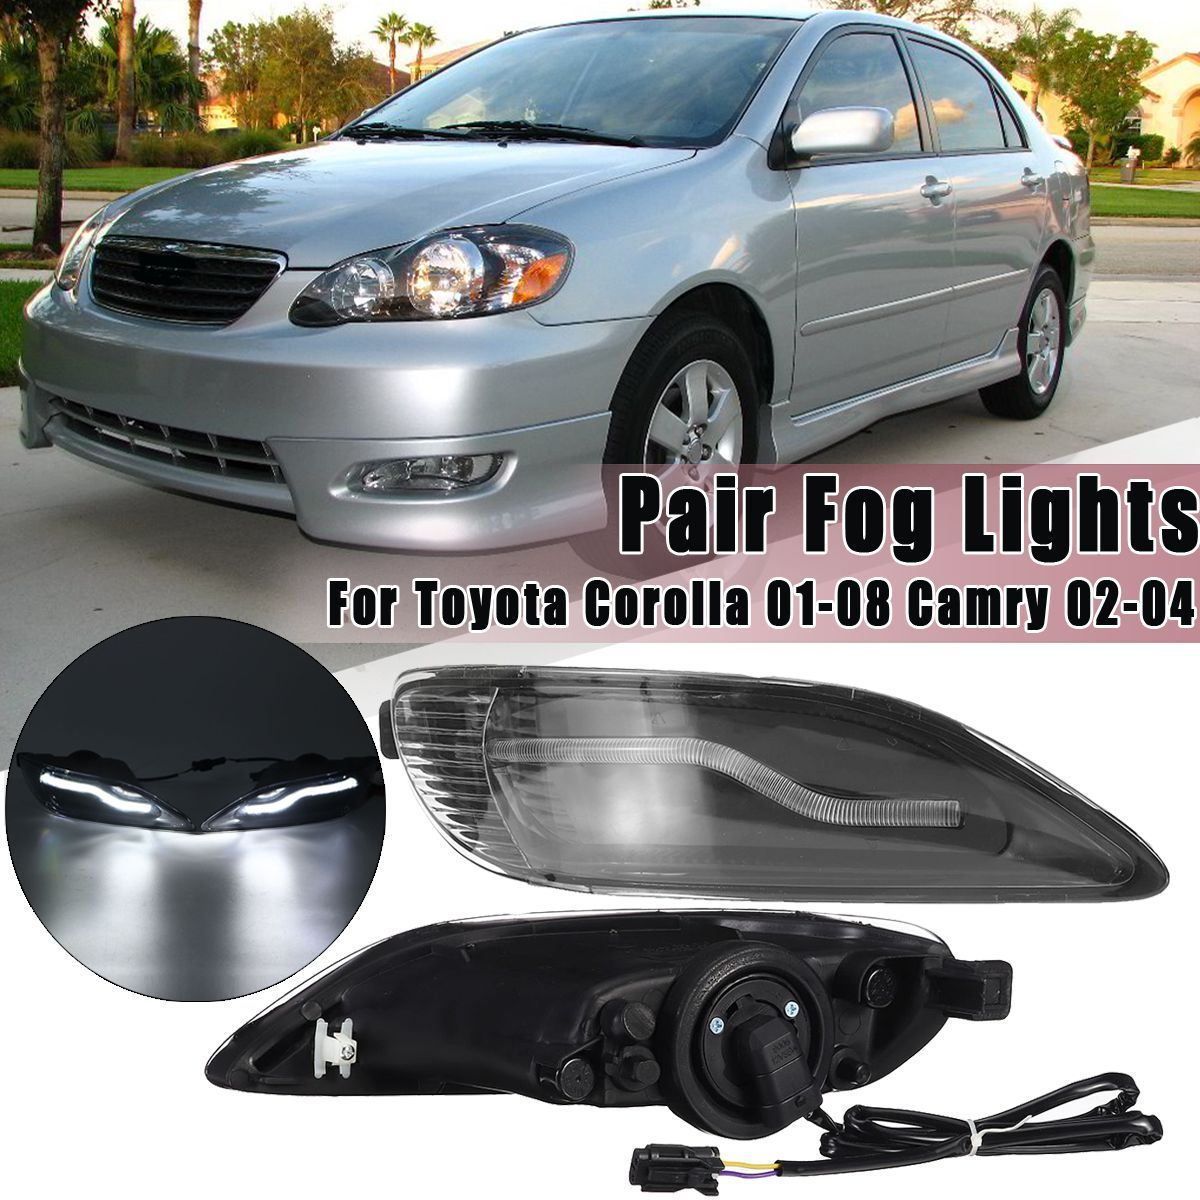 2Pcs-Car-Front-LED-Fog-Lights-Turn-Signal-Lamps-For-Toyota-Corolla-Camry-1615075